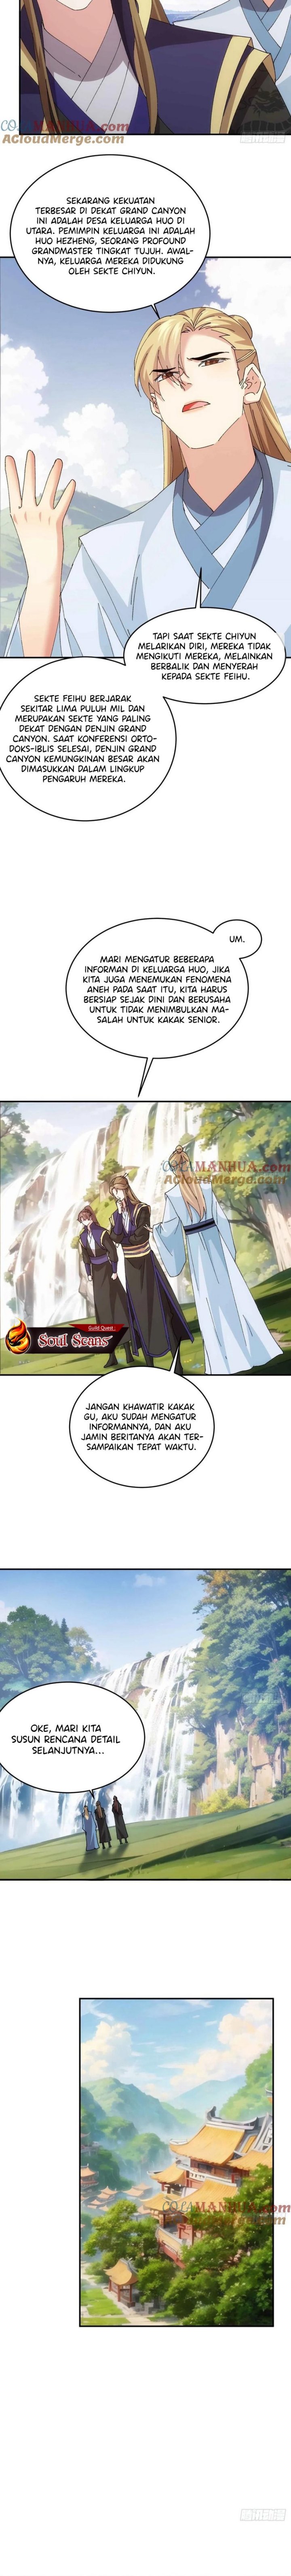 Dilarang COPAS - situs resmi www.mangacanblog.com - Komik i just dont play the card according to the routine 210 - chapter 210 211 Indonesia i just dont play the card according to the routine 210 - chapter 210 Terbaru 4|Baca Manga Komik Indonesia|Mangacan